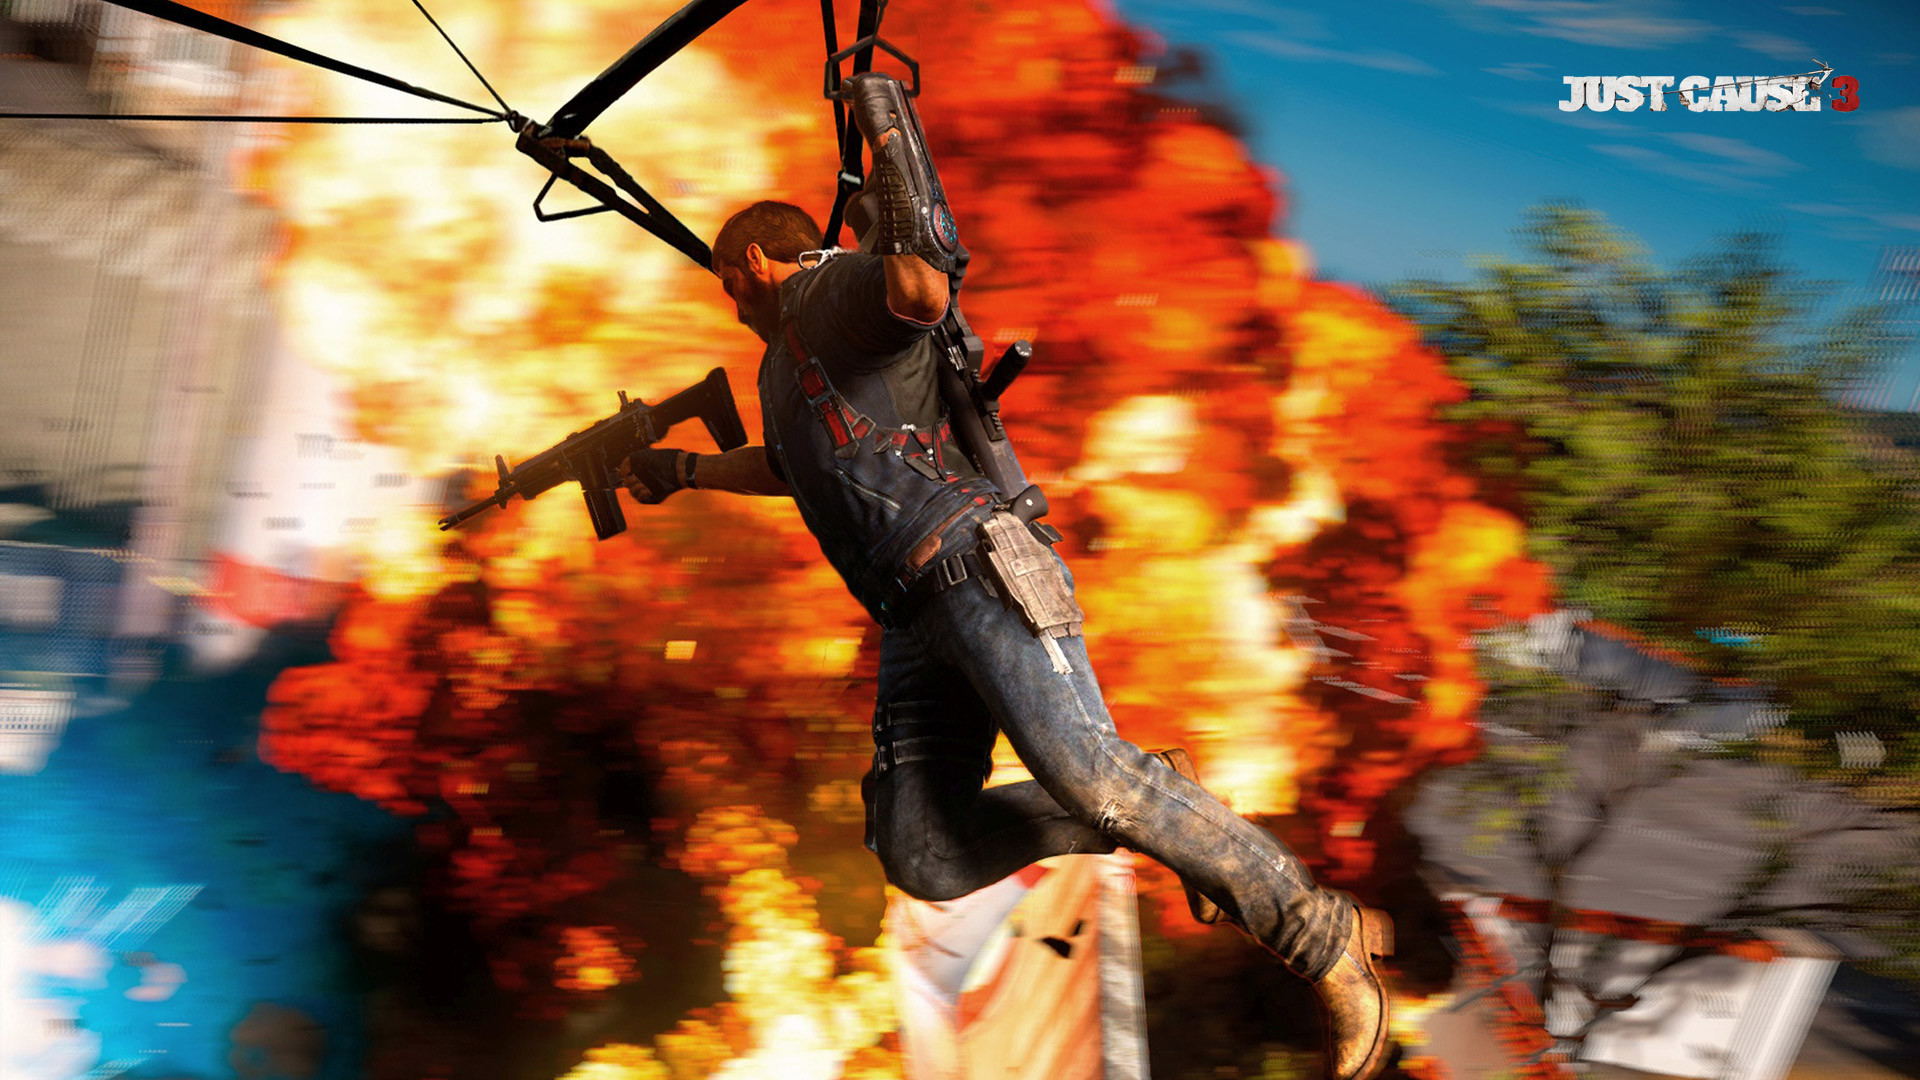 1920x1080 Free Just Cause 3 Wallpaper in 